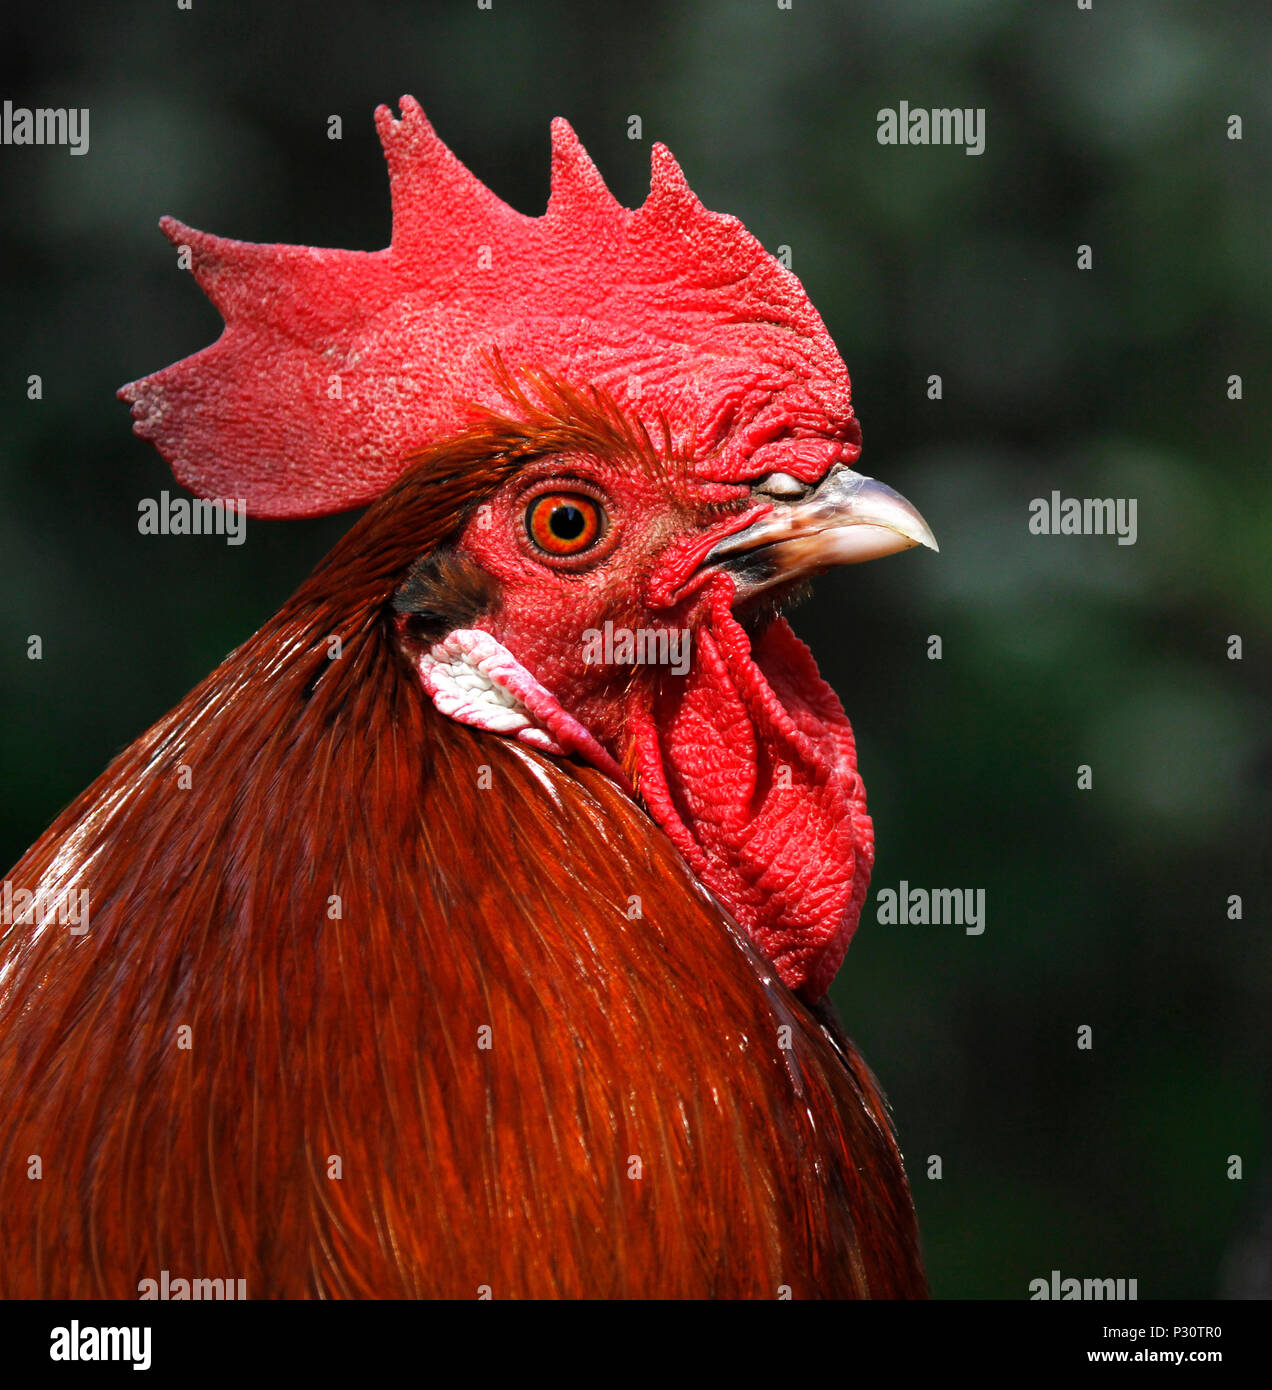 Head of a rooster cock (Gallus gallus domesticus) with large red comb and wattles. Stock Photo